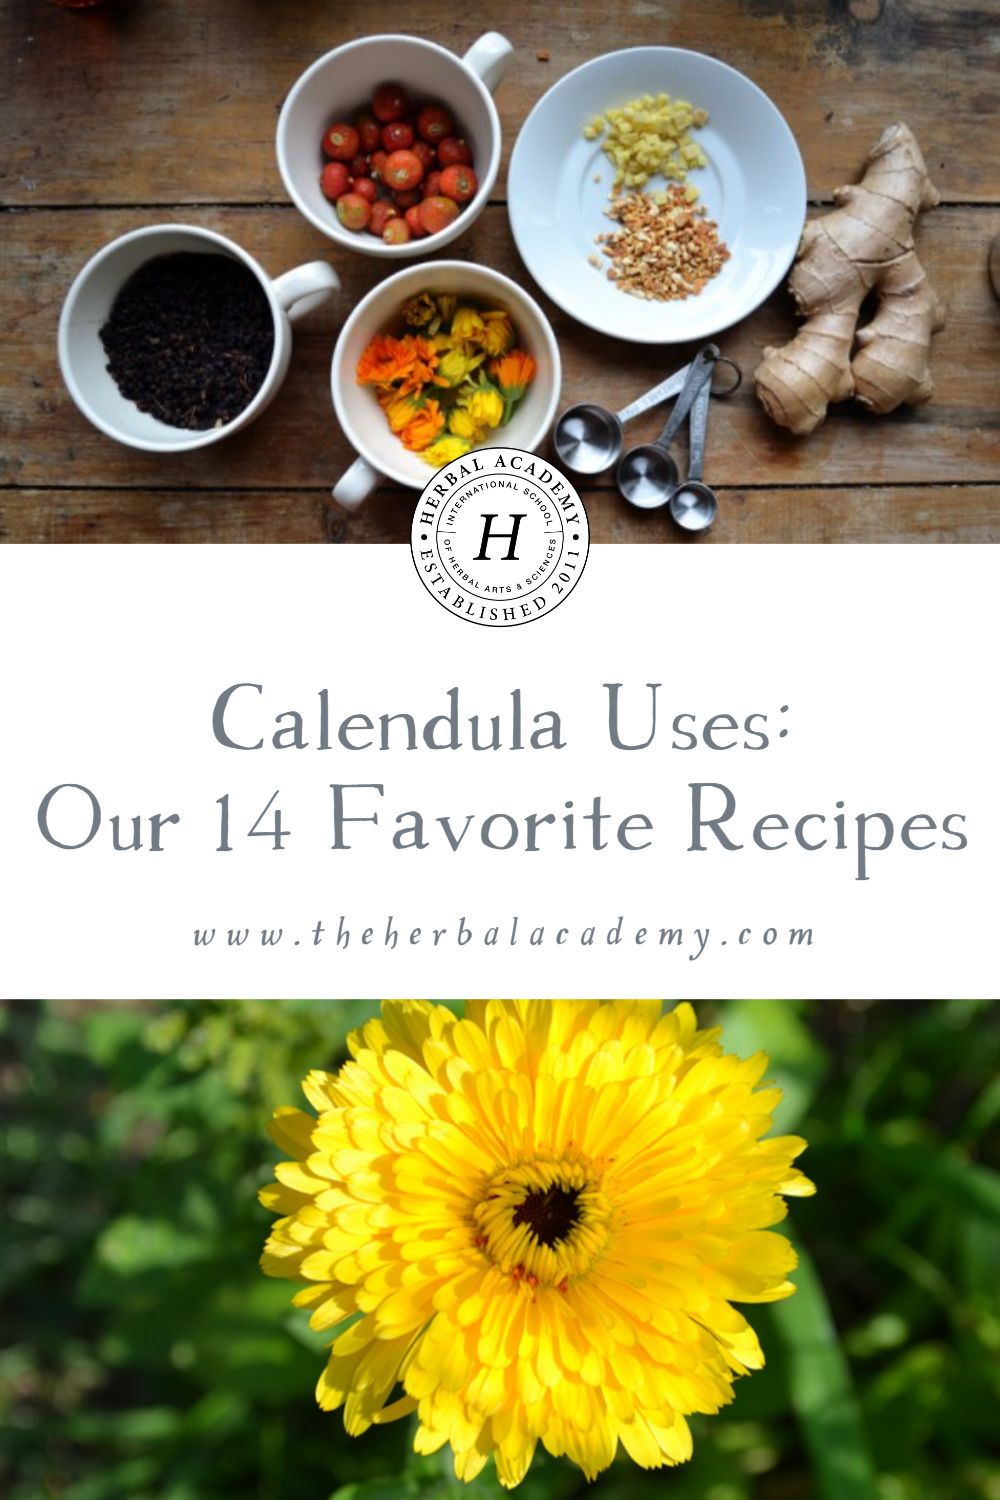 Calendula Uses: Our 14 Favorite Recipes | Herbal Academy | Calendula is most commonly known as a support for cuts and skin health. There are so many calendula uses, but here we share our 14 favorites!